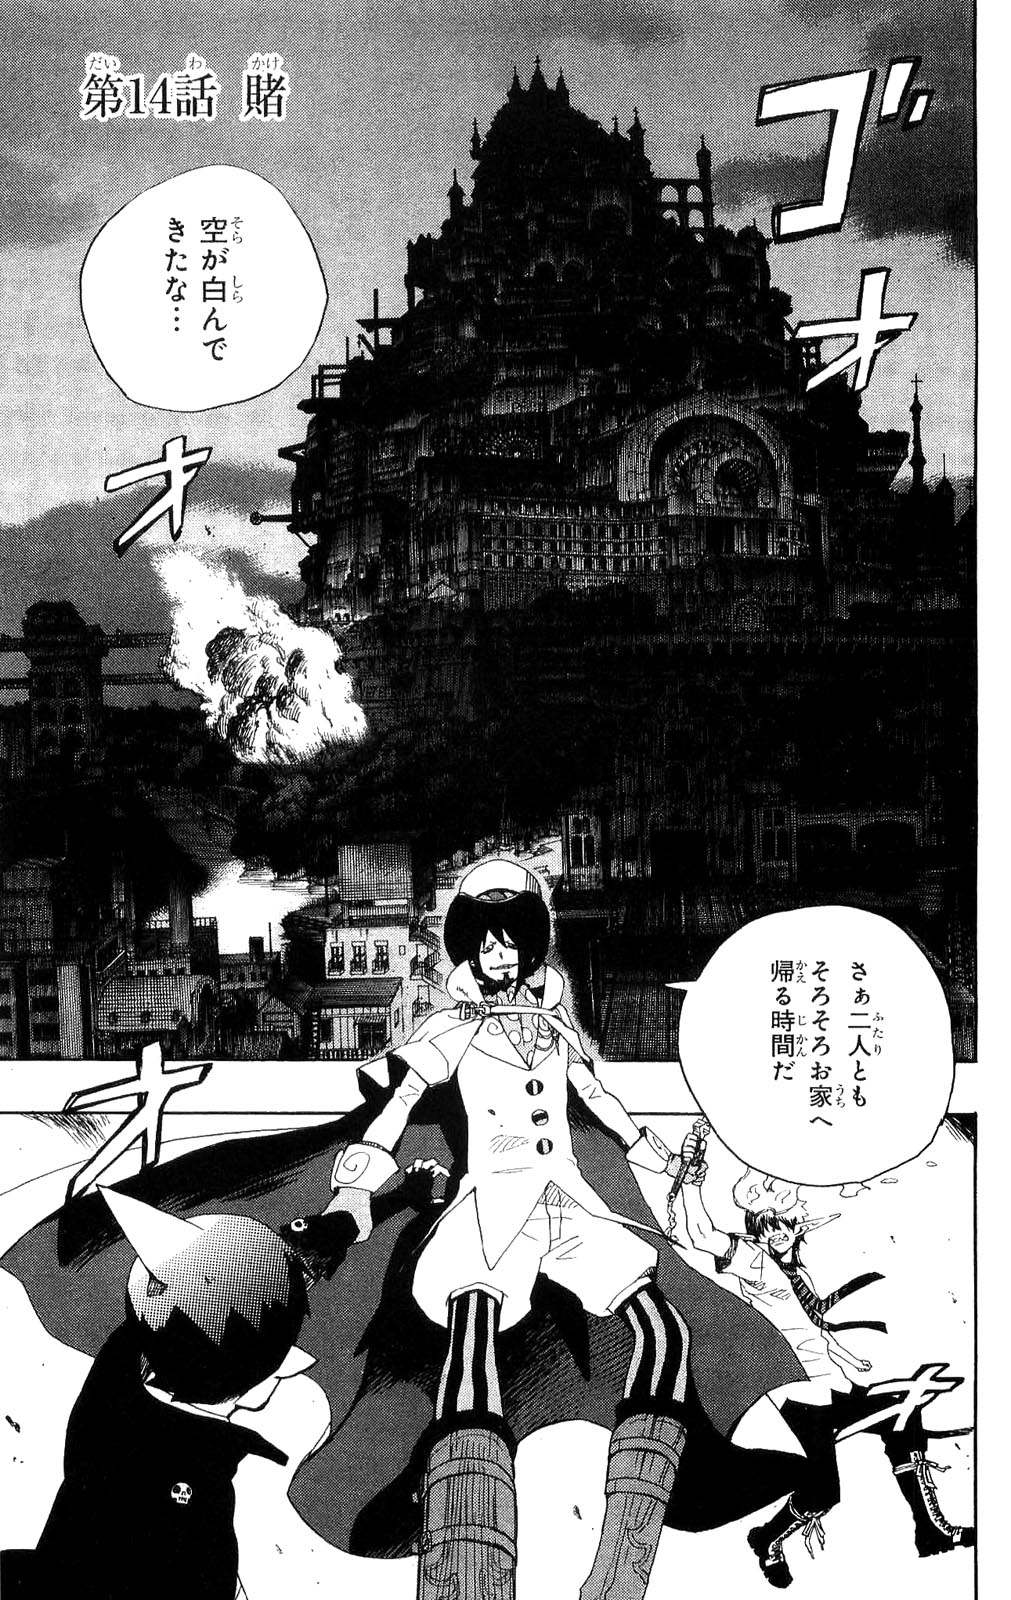 Ao no Exorcist - Chapter 14 - Page 1